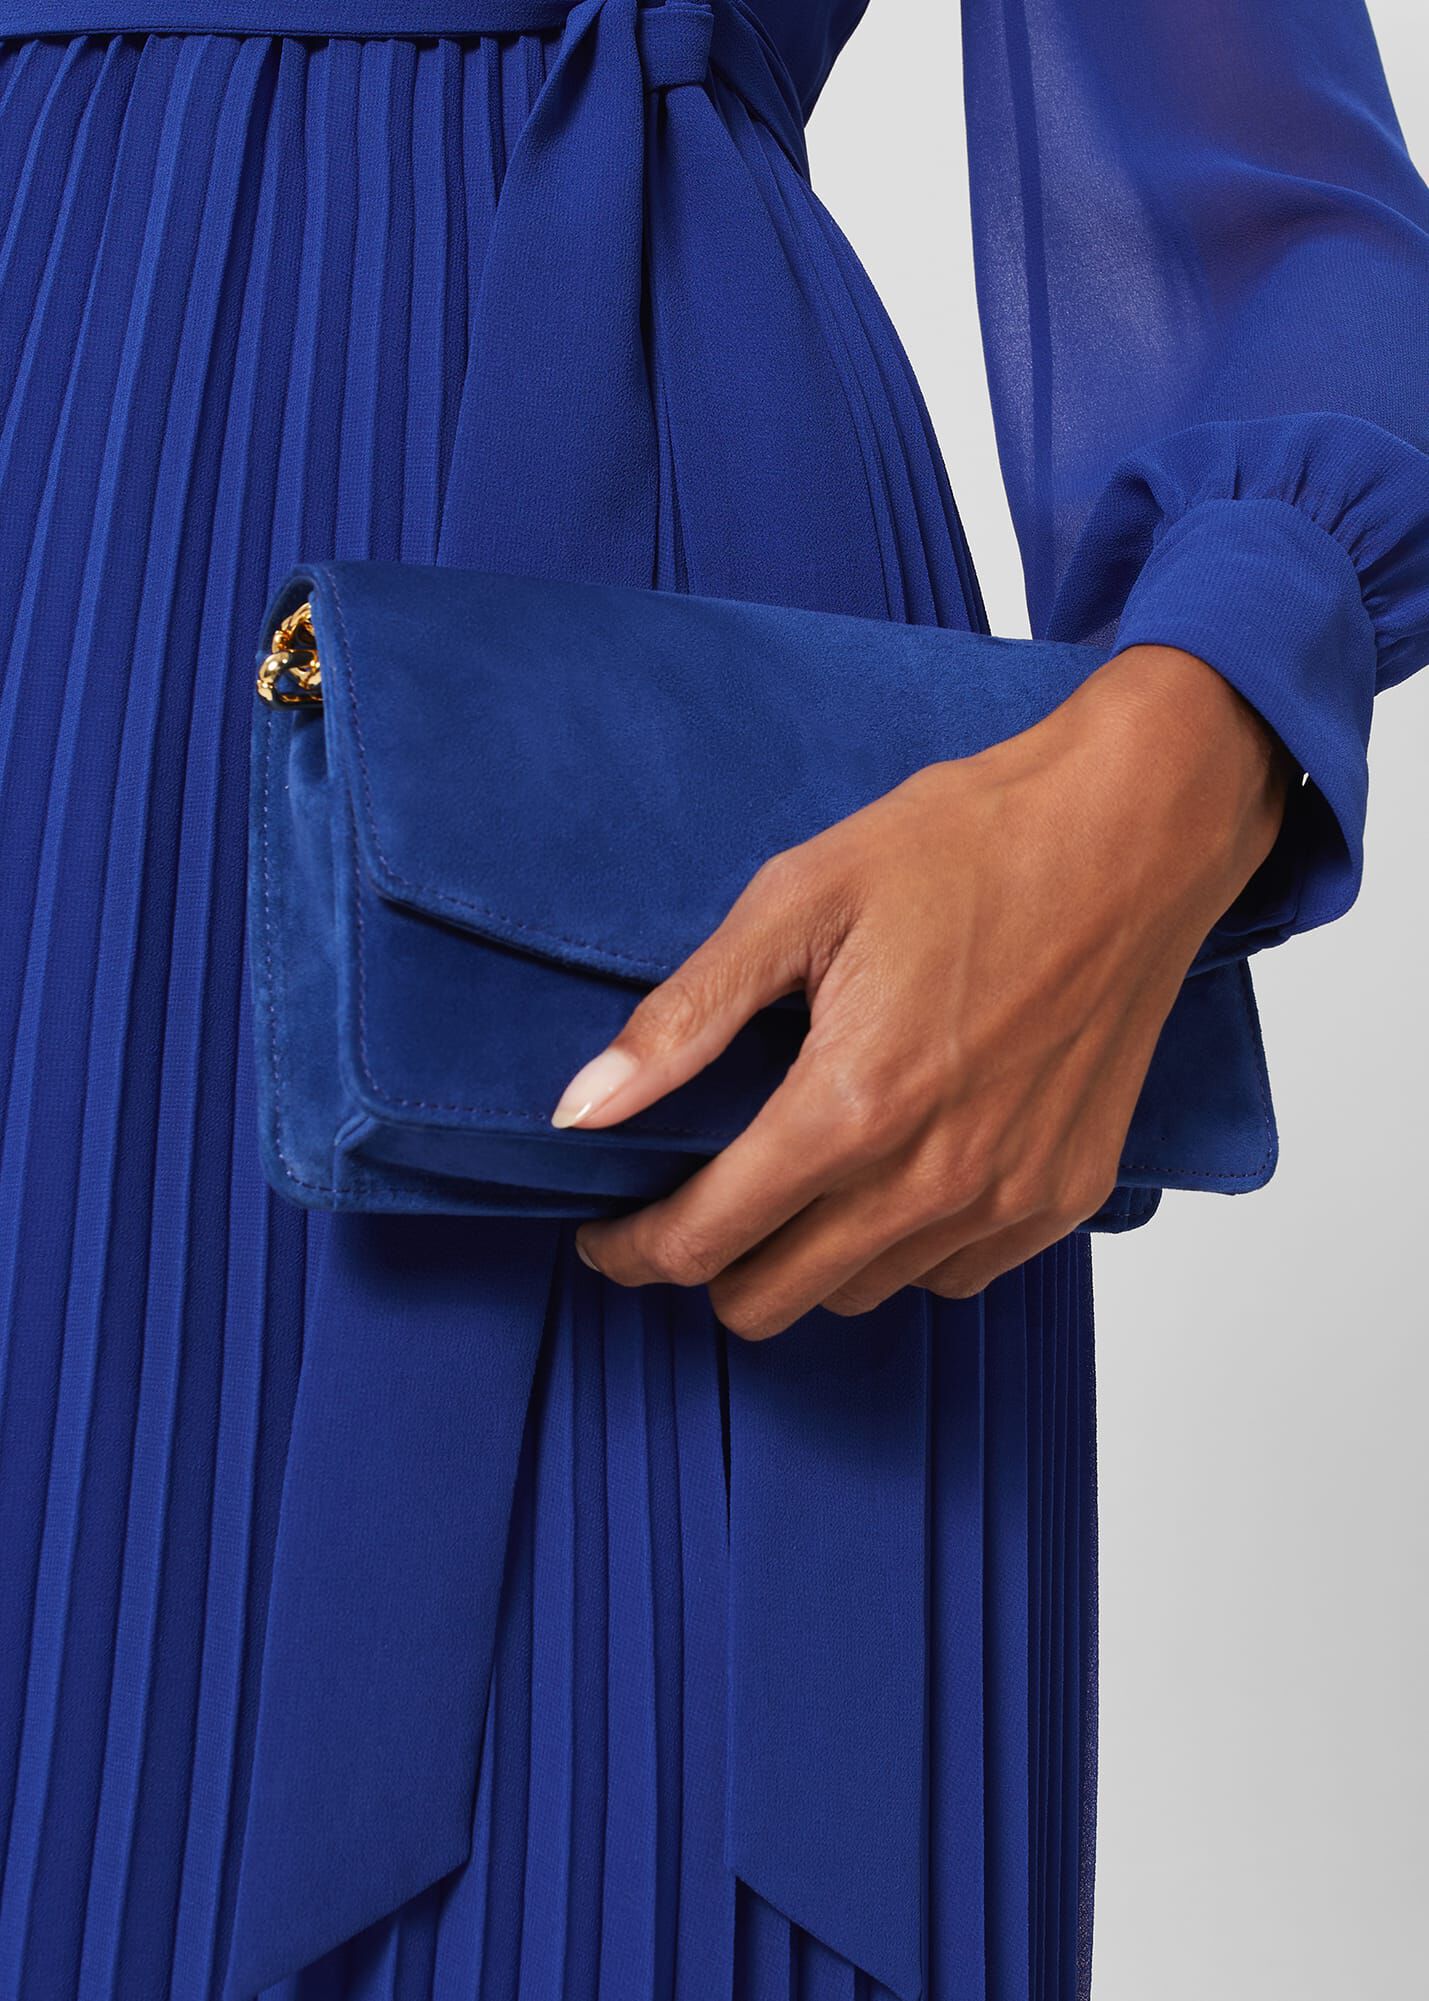 Leather clutch bag Victoria Beckham Blue in Leather  32256492